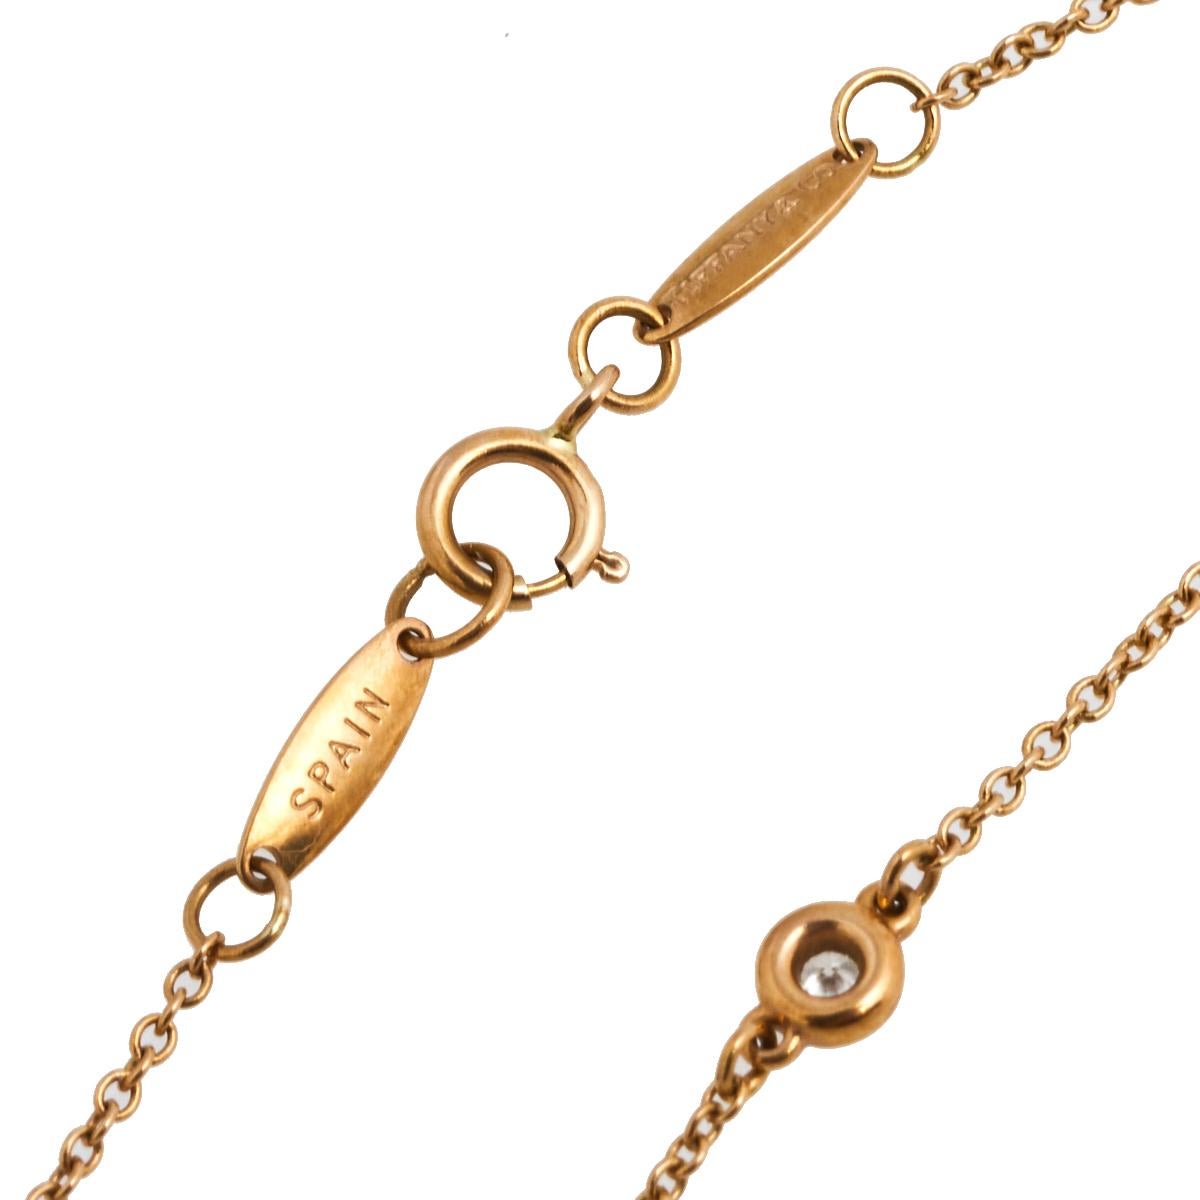 Constructed in beautiful 18k rose gold, this Tiffany & Co. Elsa Peretti Diamonds by the Yard bracelet will make an elegant and stylish addition to your collection. The delicate chain on this bracelet holds a spring-ring clasp and three single